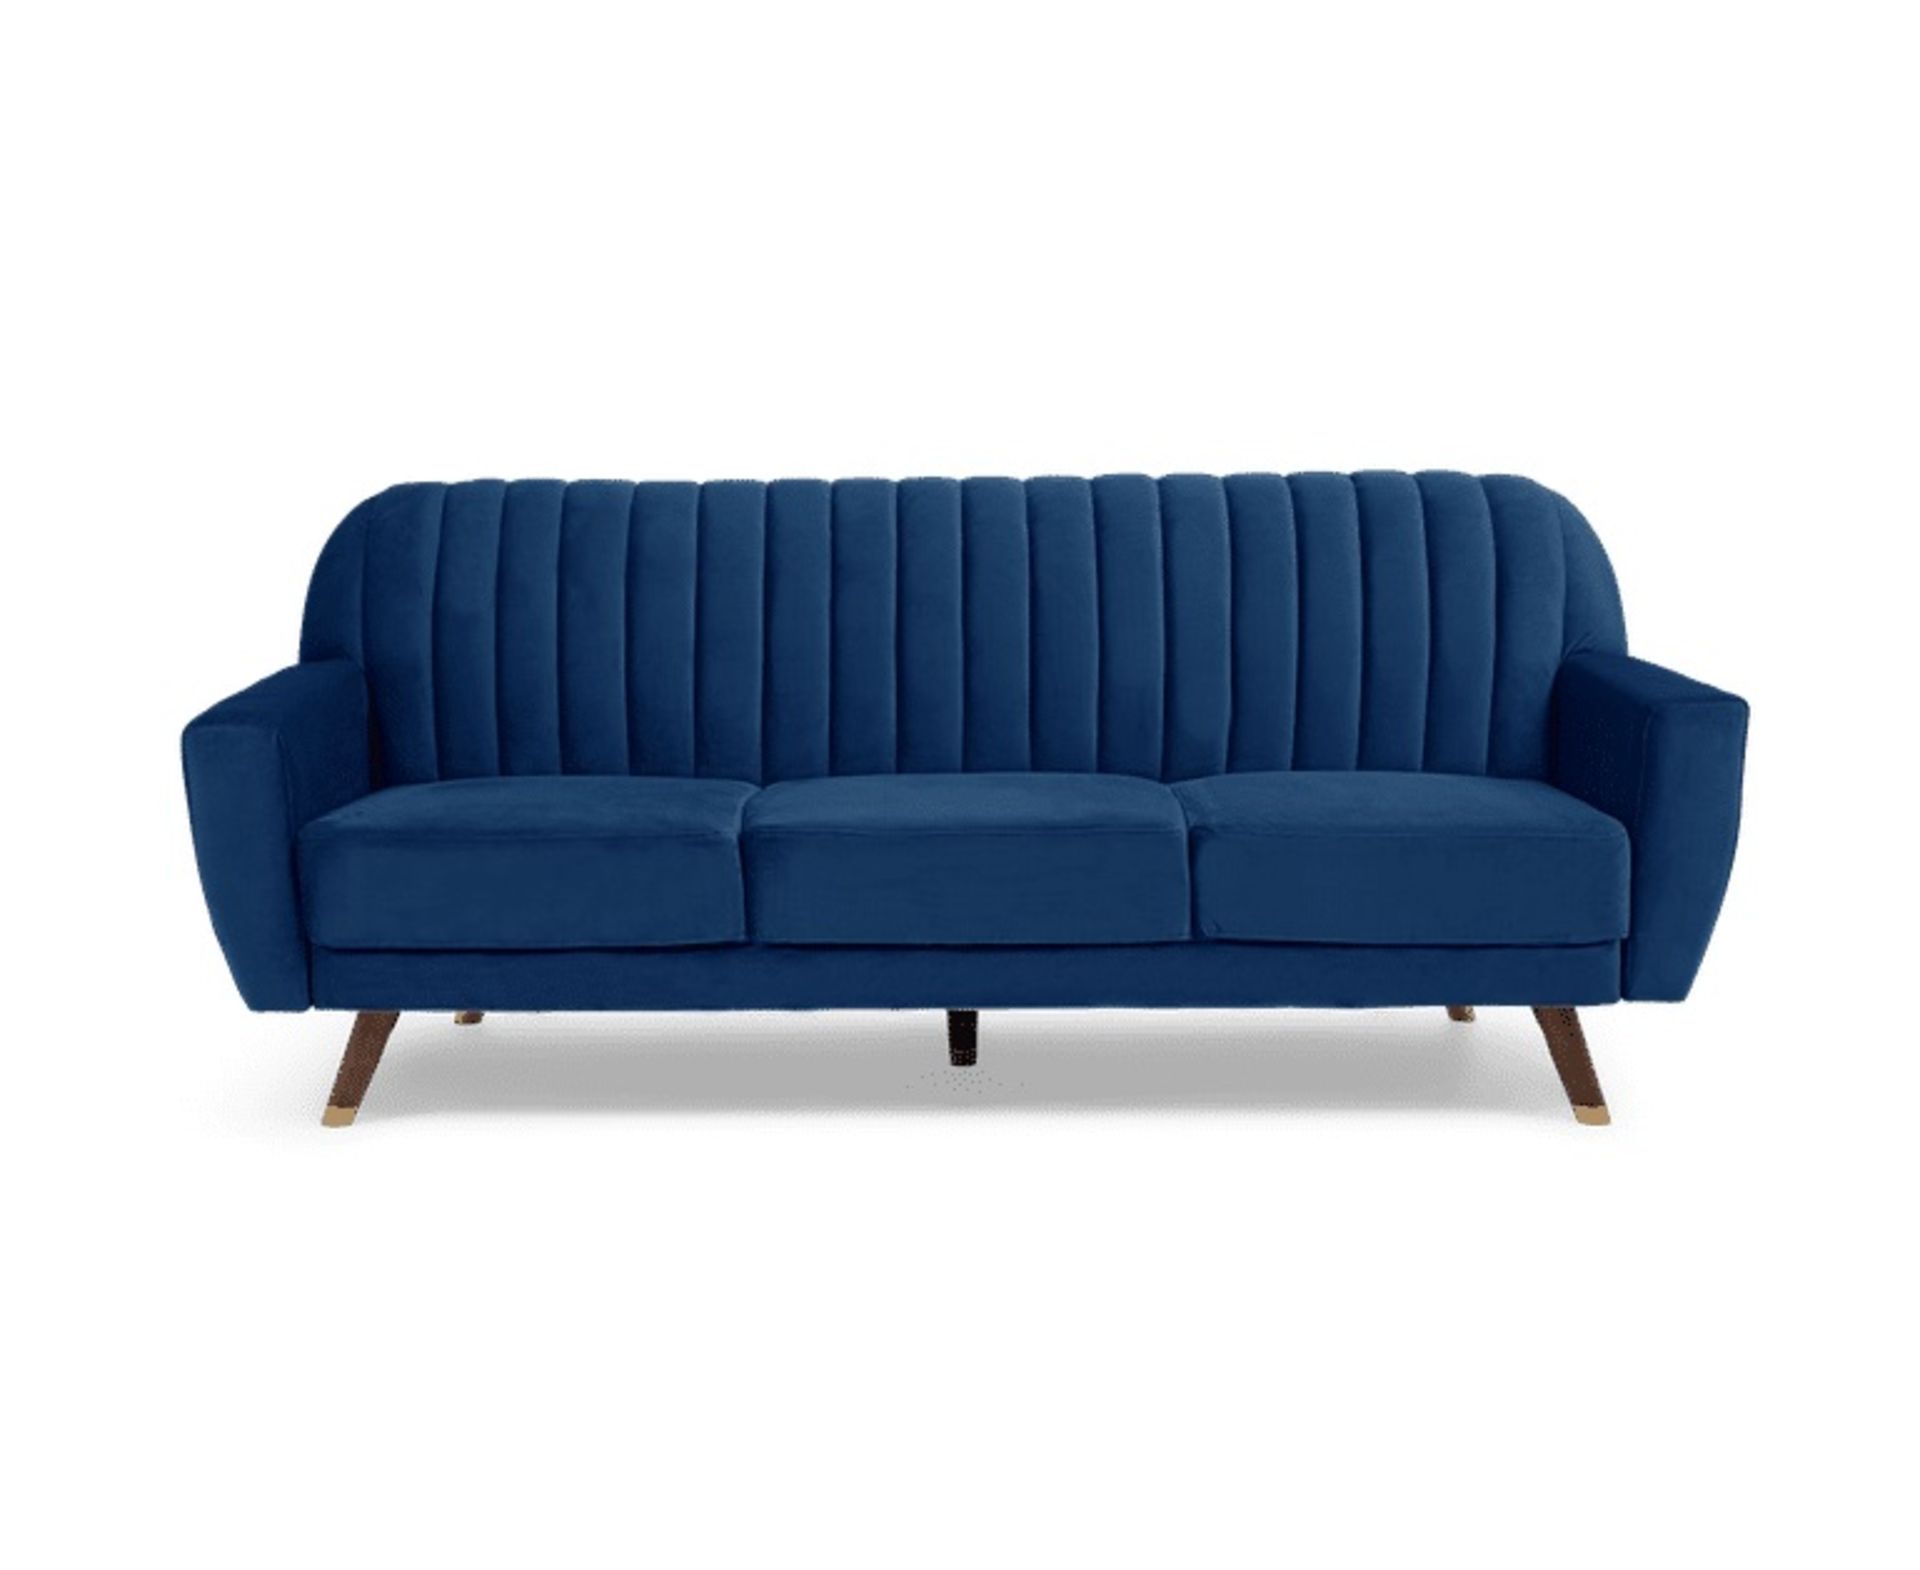 Lucia Sofa Bed In Blue Velvet A Beautiful Curved Backrest And Contrasting Dark Wooden Legs - The - Image 2 of 3